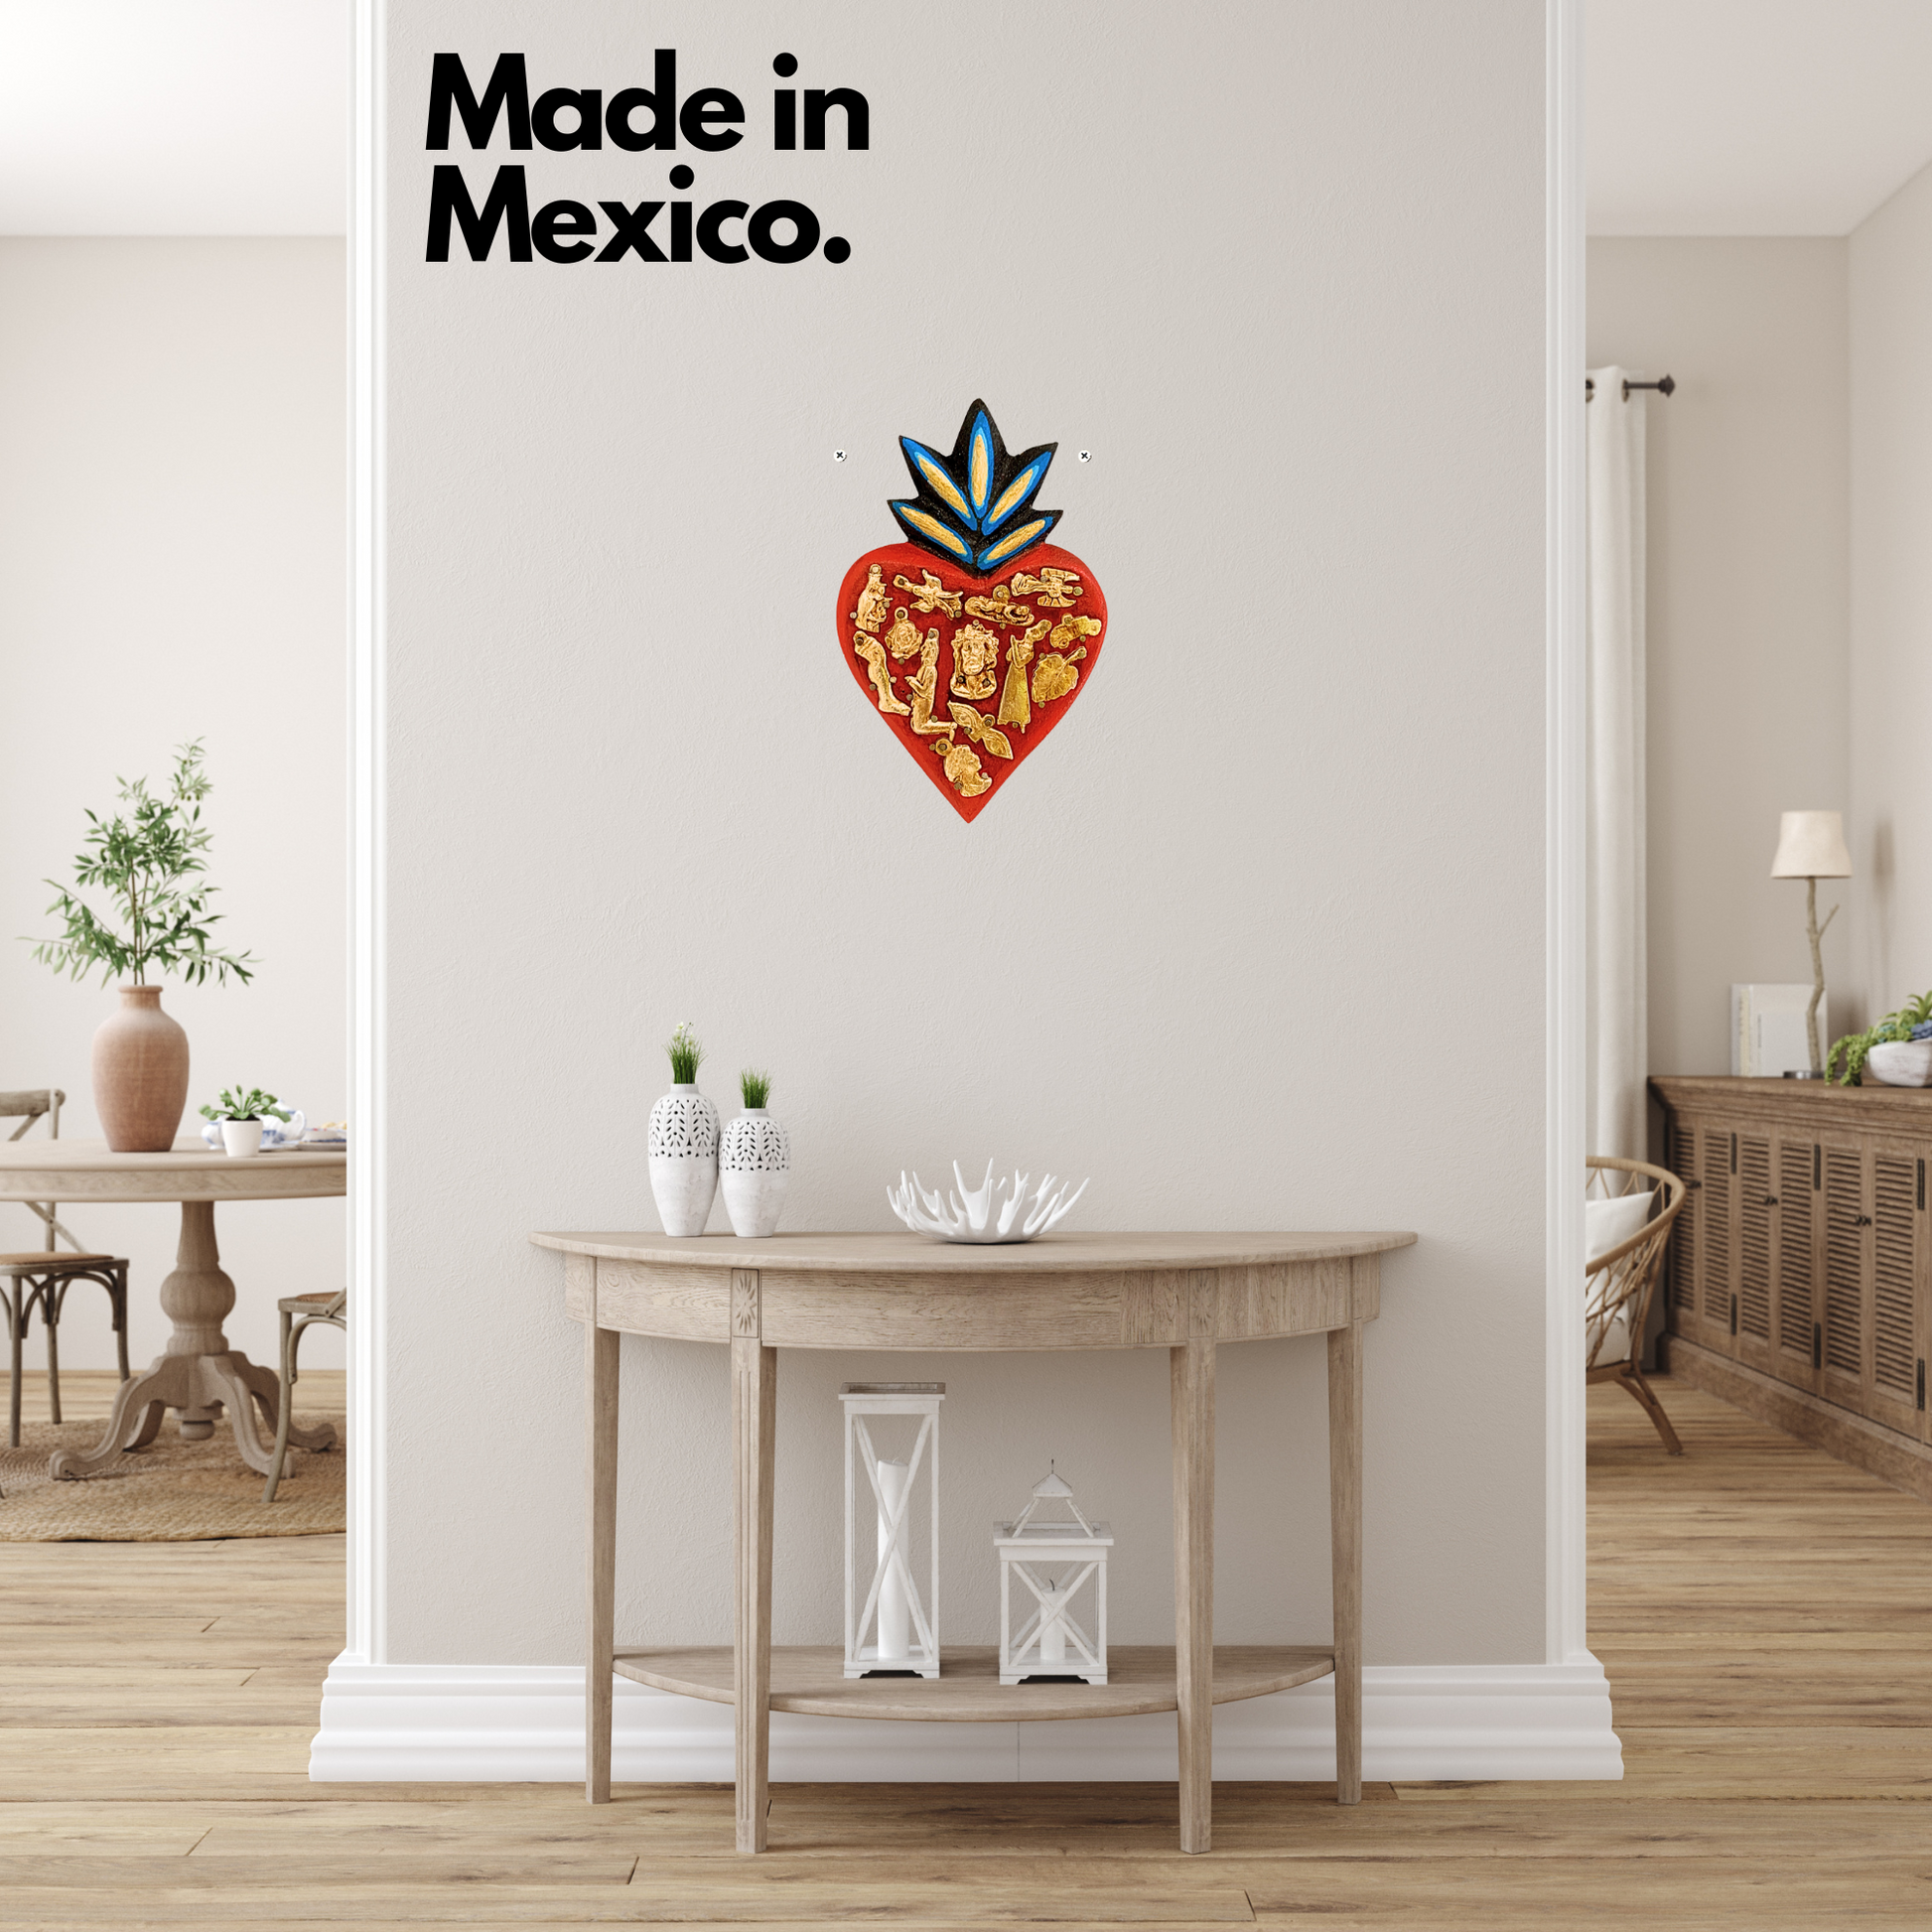 made in mexico Ex Voto Wooden Sacred Heart, hand-painted by Mexican artisans, featuring colorful milagros, perfect for wall decor and enhancing your space.